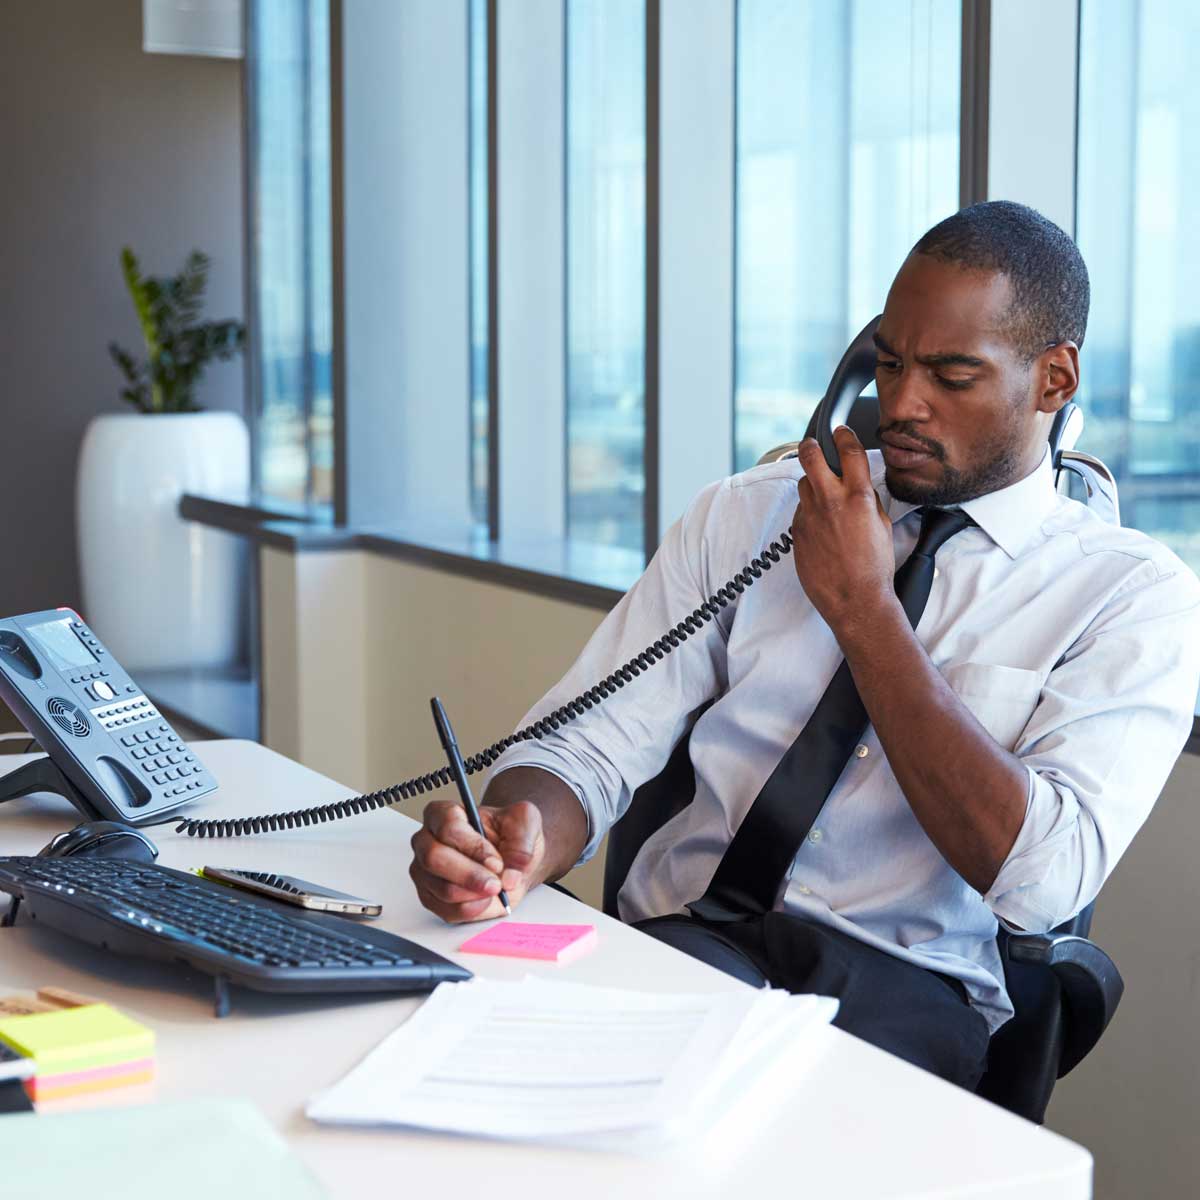 Businessman-Making-Phone-Call-Sitting-At-Desk-In-Office